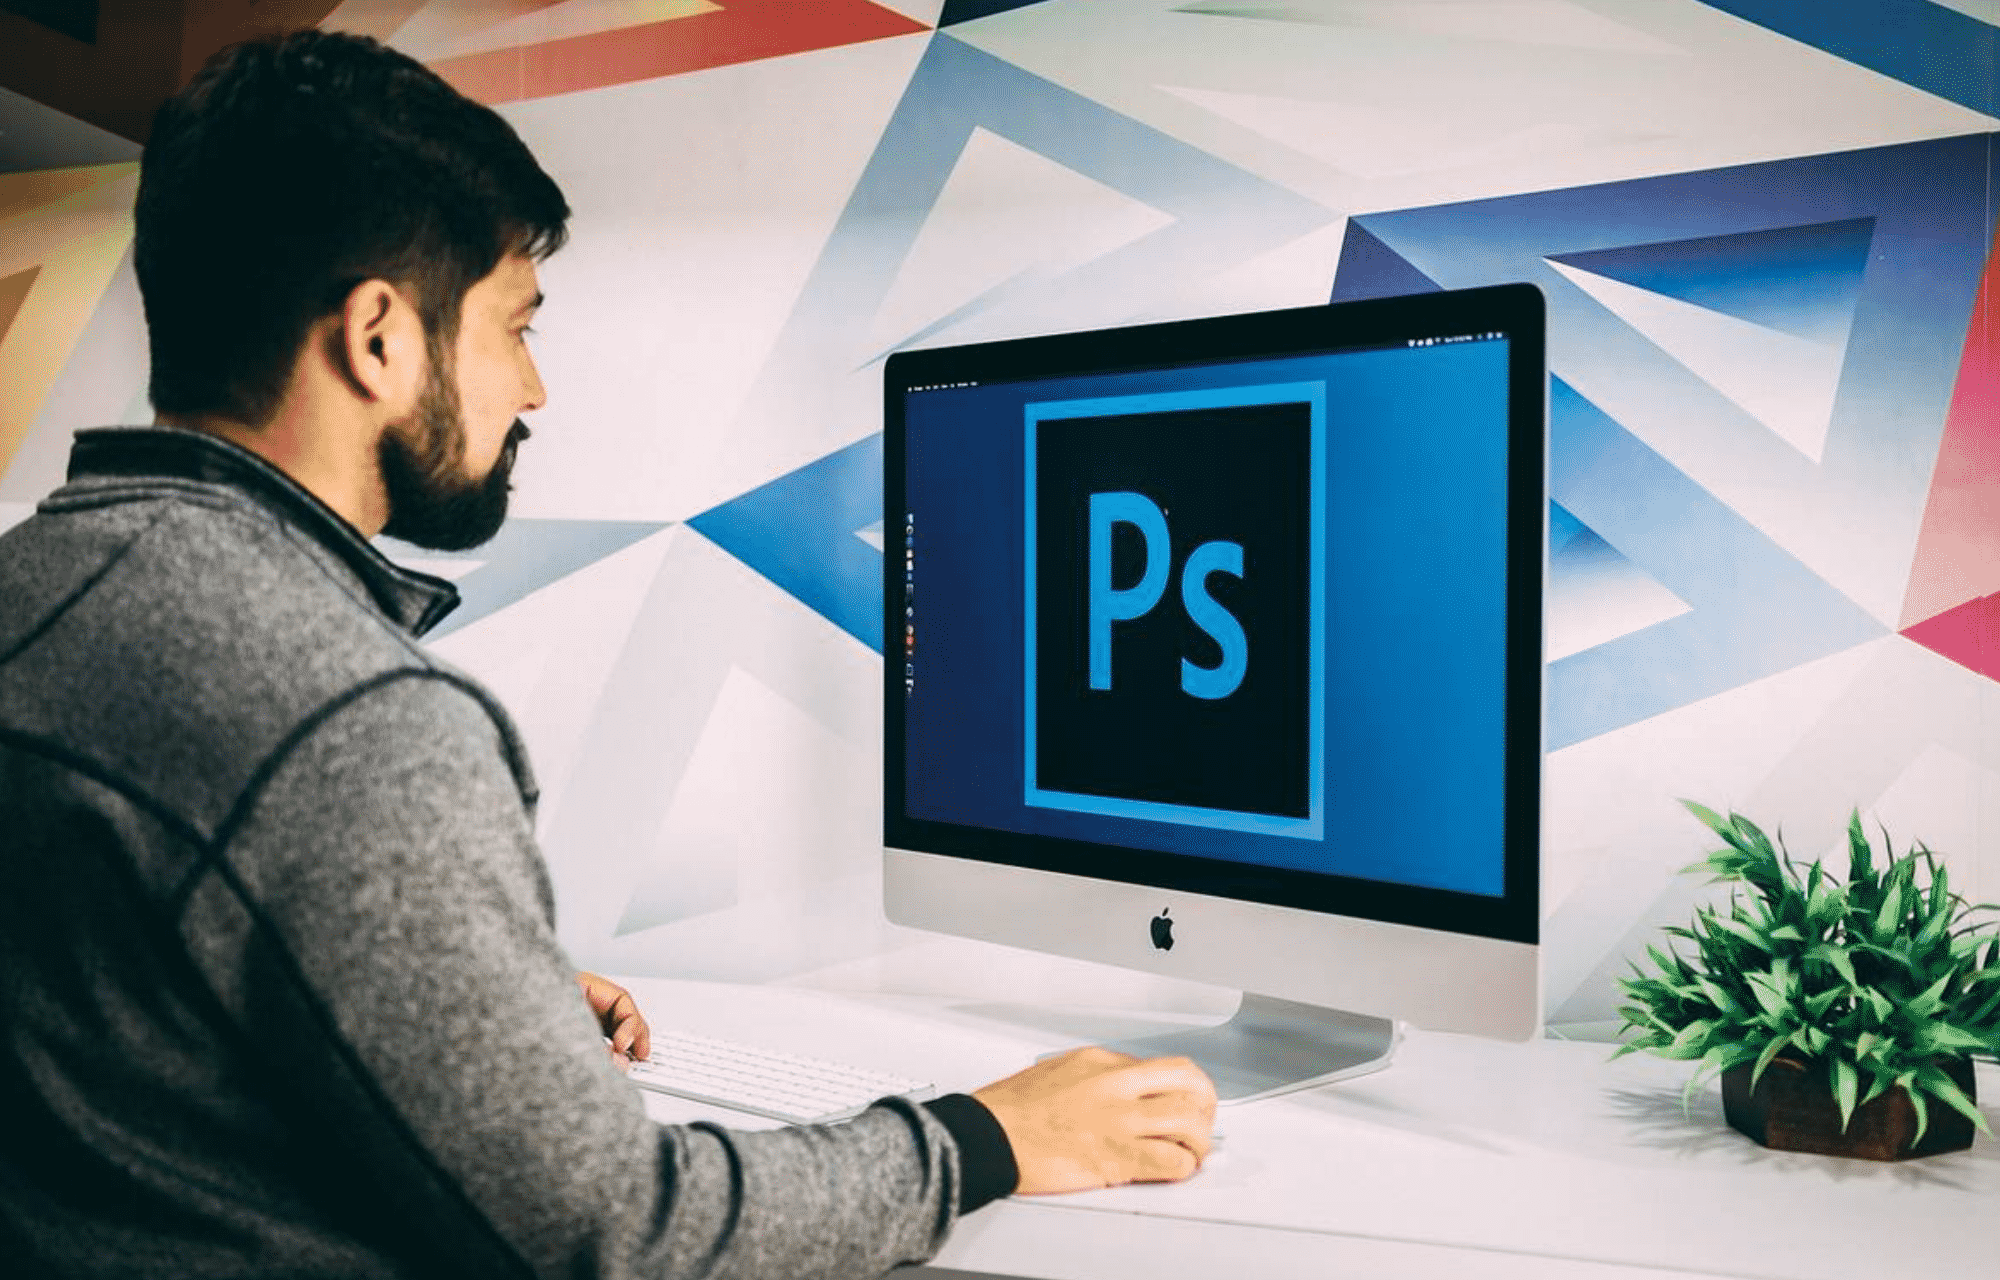 Photoshop Tutorials - The Ultimate Guide